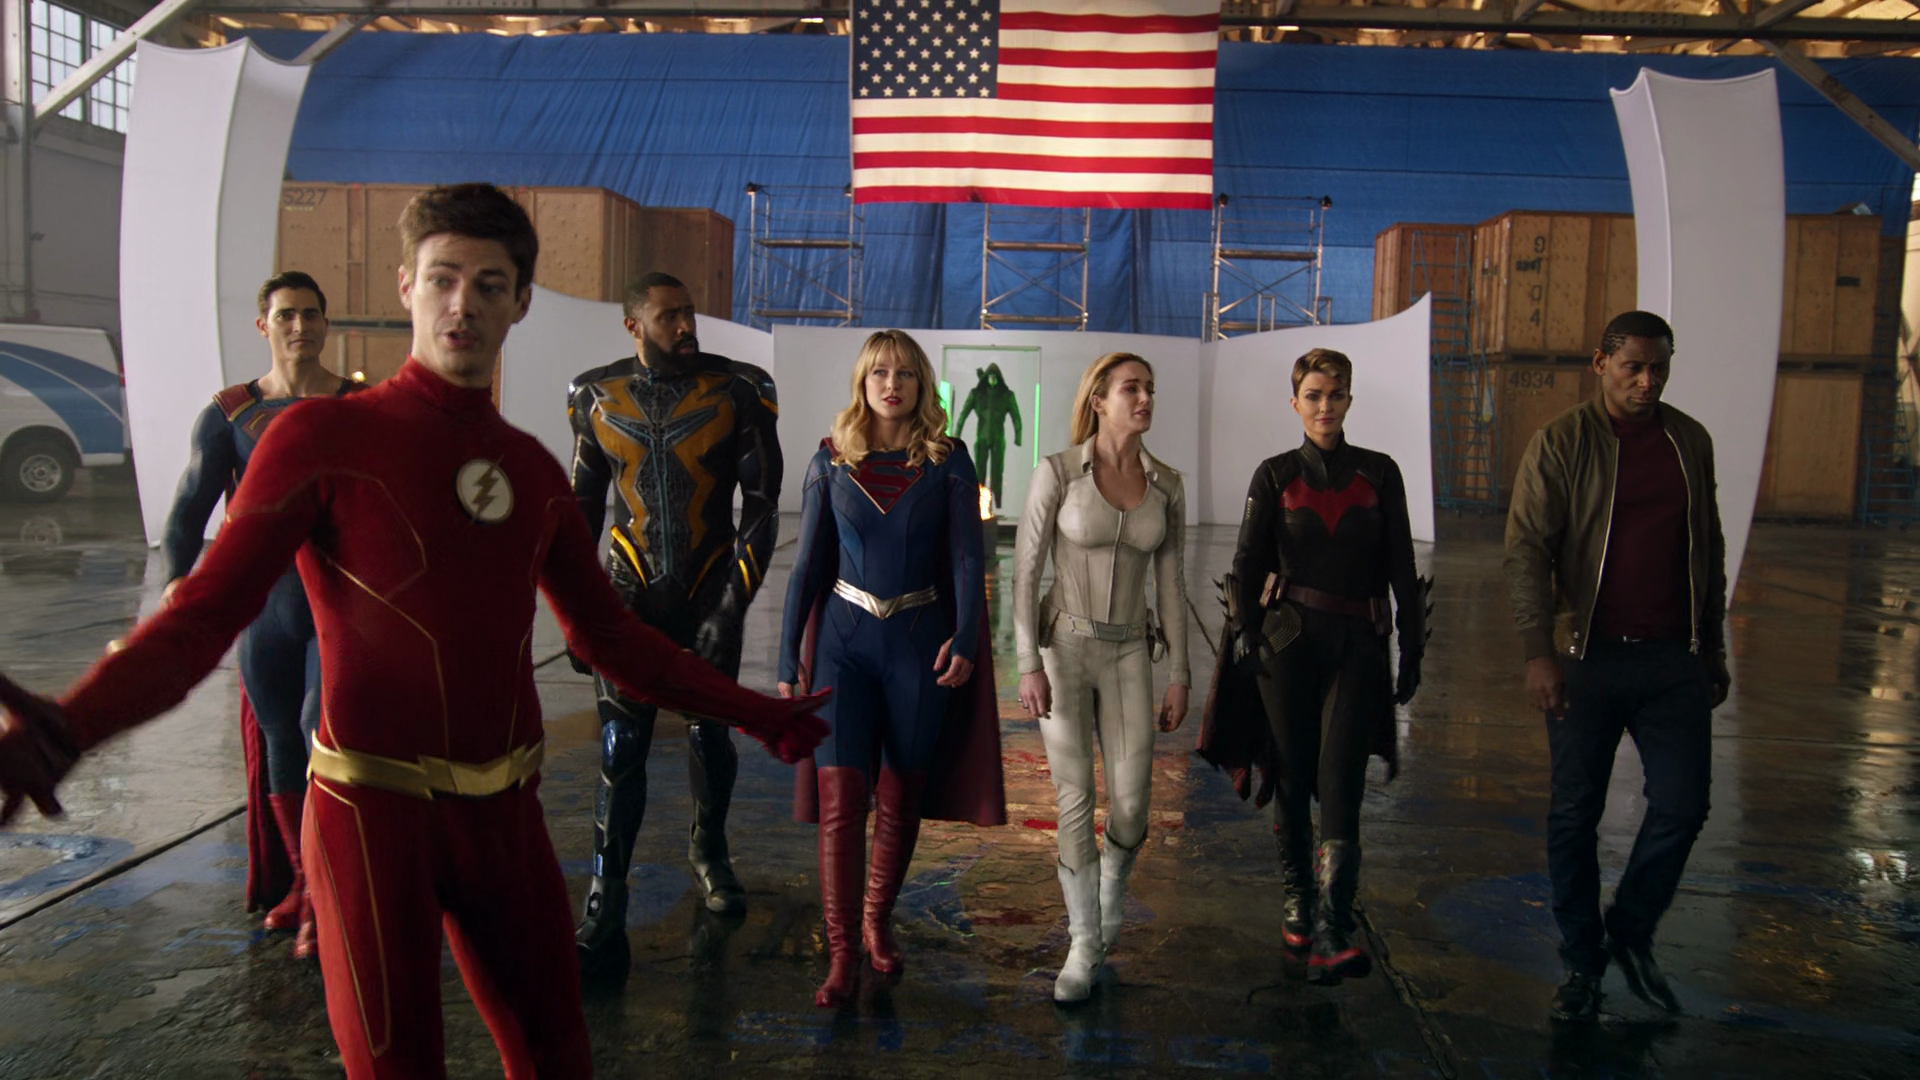 The Justice League officially assembles in Supergirl Season 5 Episode 9 "Crisis on Infinite Earths Part One" (2019), The CW